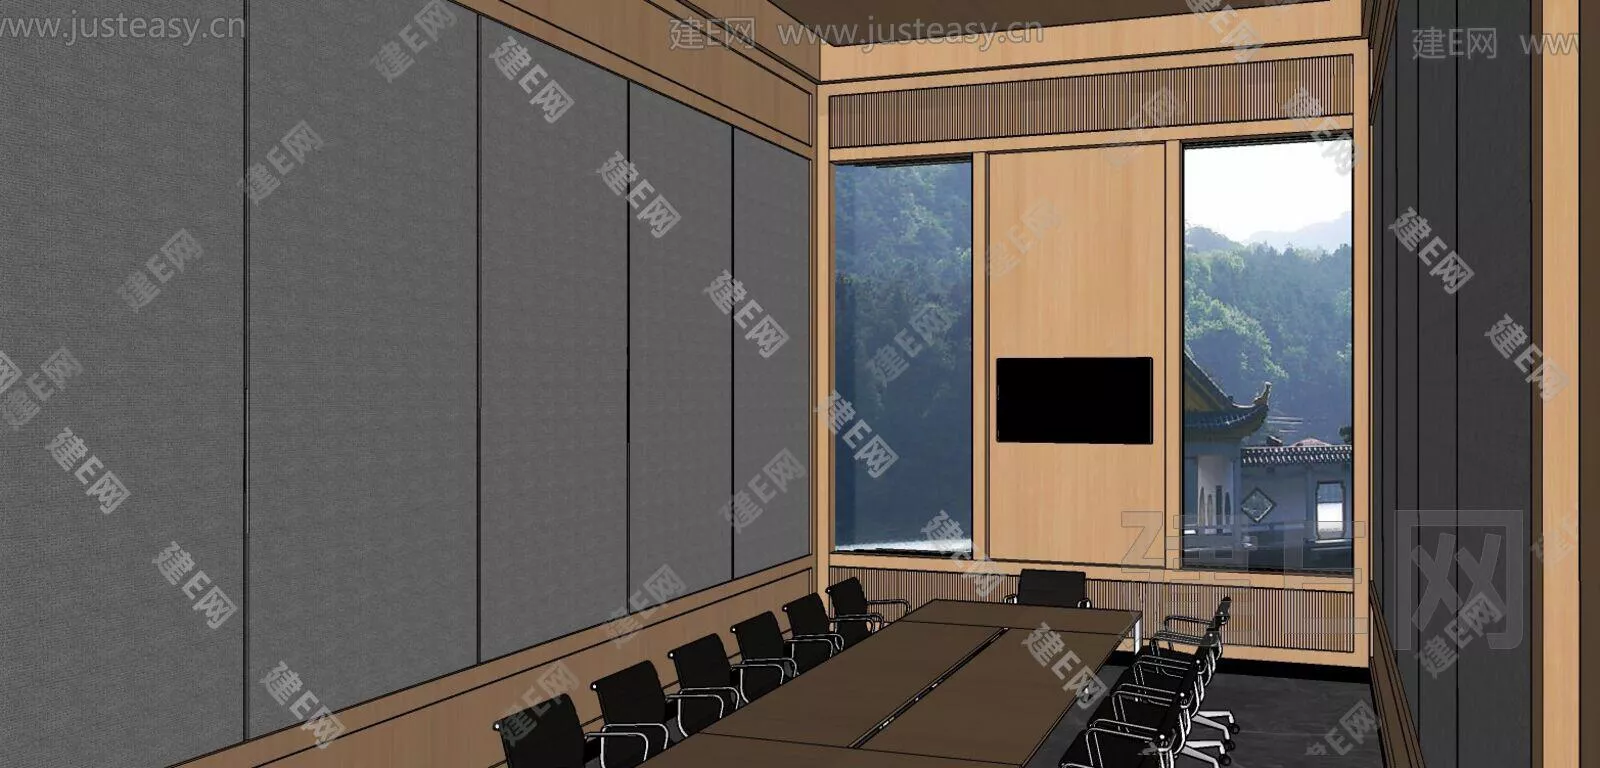 CHINESE MEETING ROOM - SKETCHUP 3D SCENE - ENSCAPE - 111165942